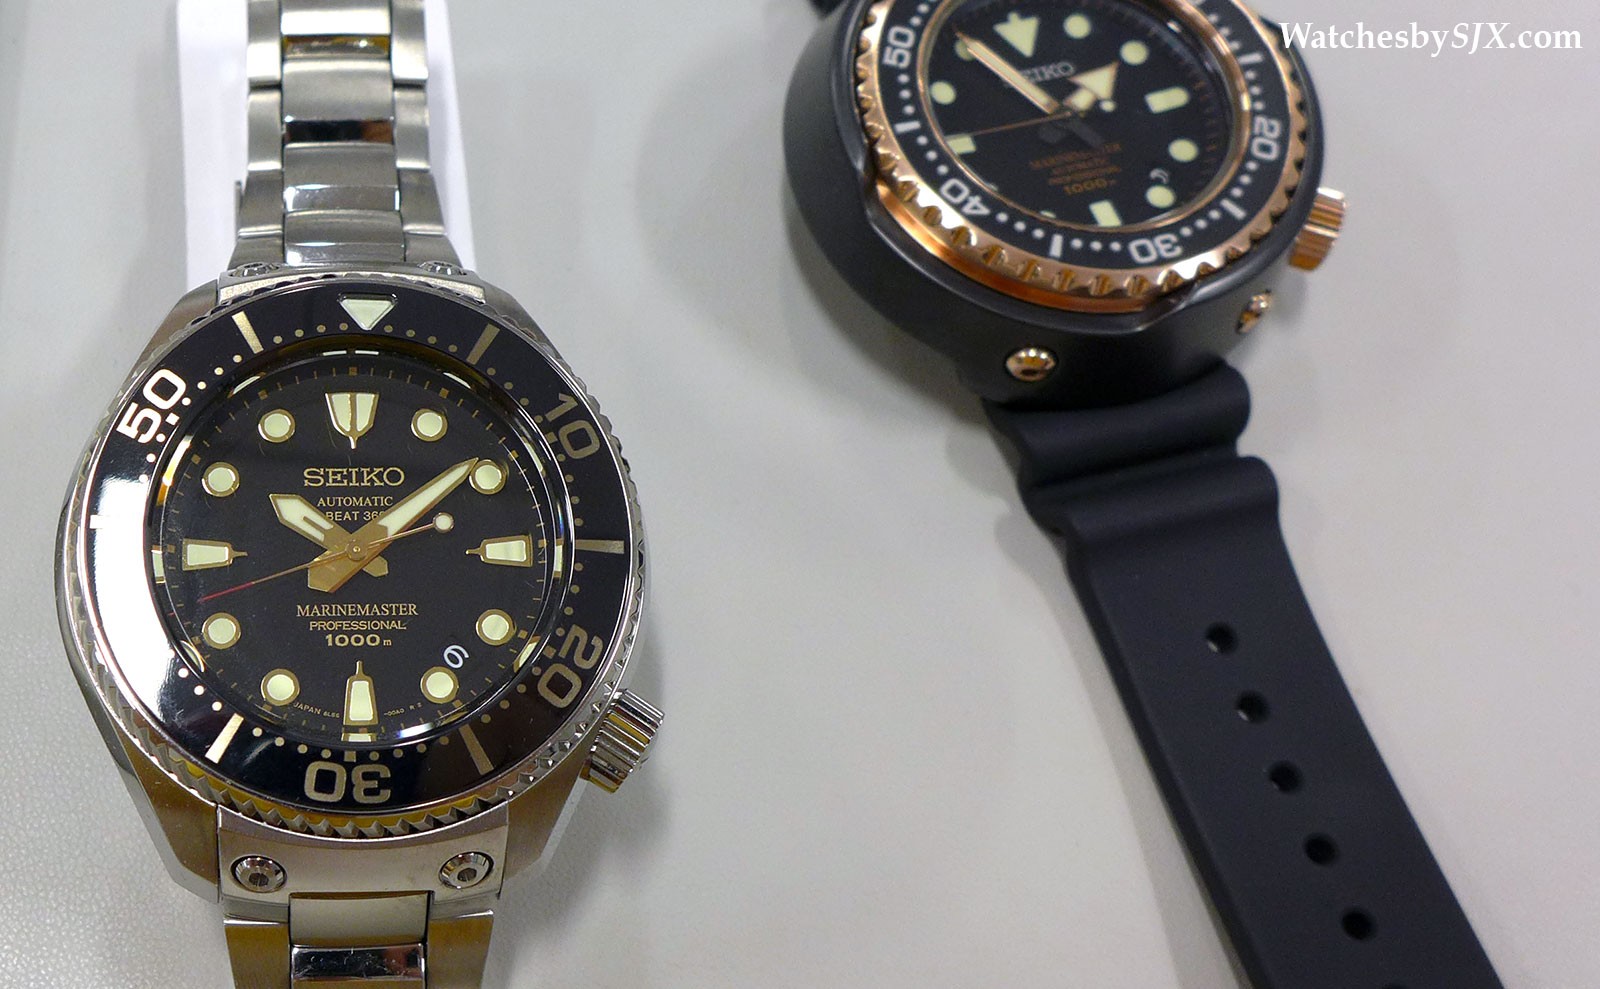 Hands-On With The Seiko Marinemaster 1000 m Hi-Beat 36,000 Limited Edition  (With Live Photos And Price) | SJX Watches